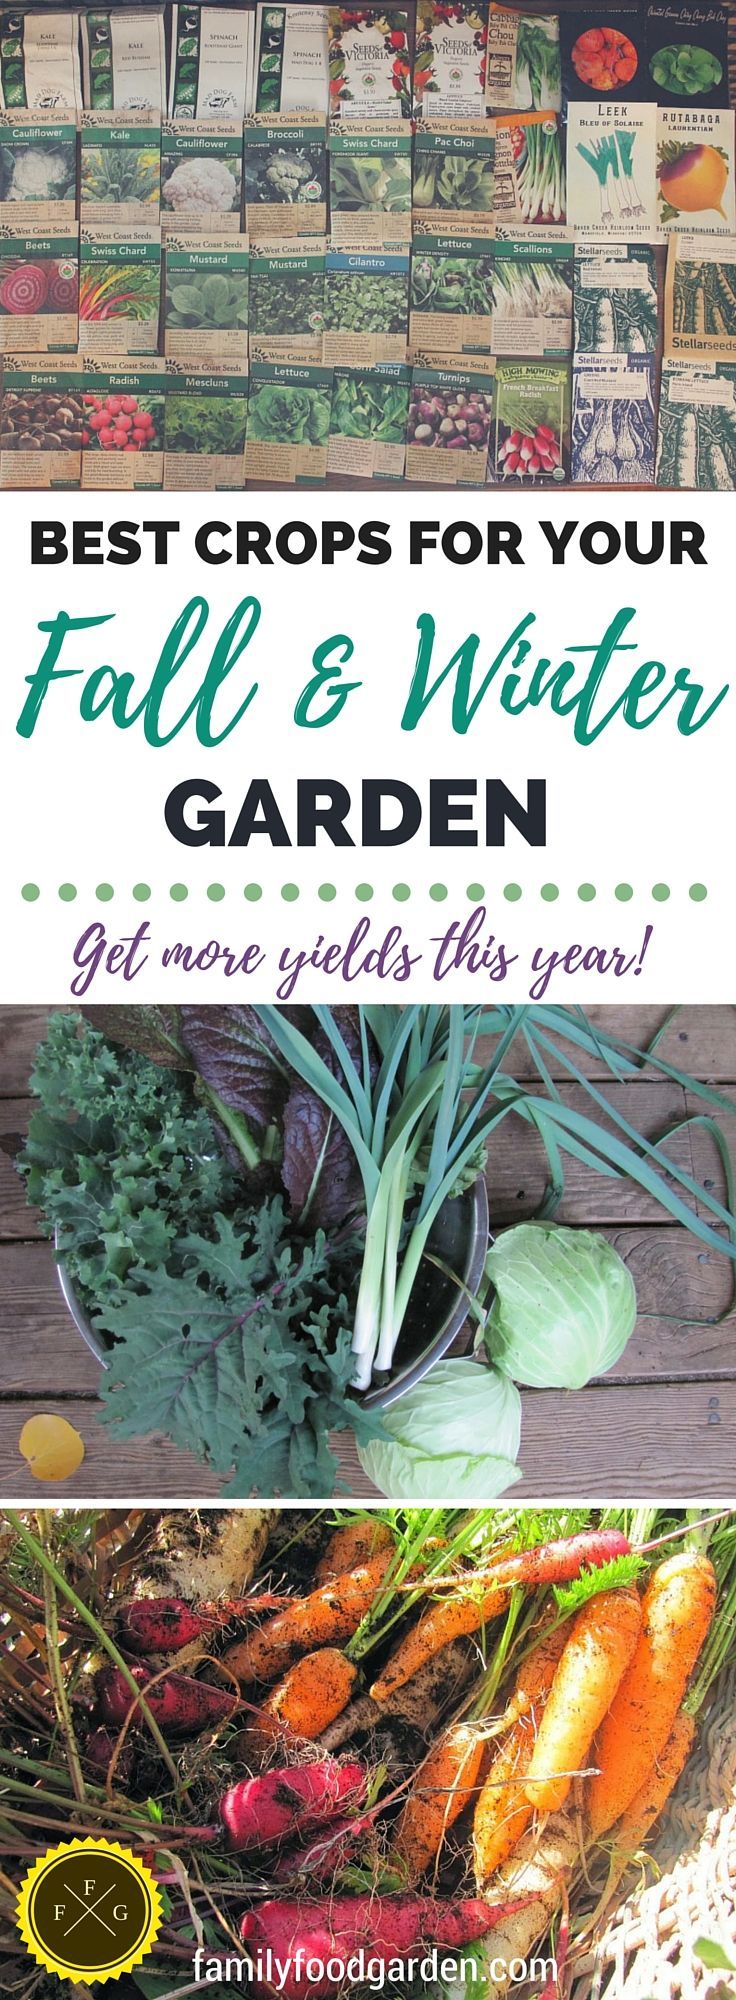 How to plan & plant your fall and winter garden